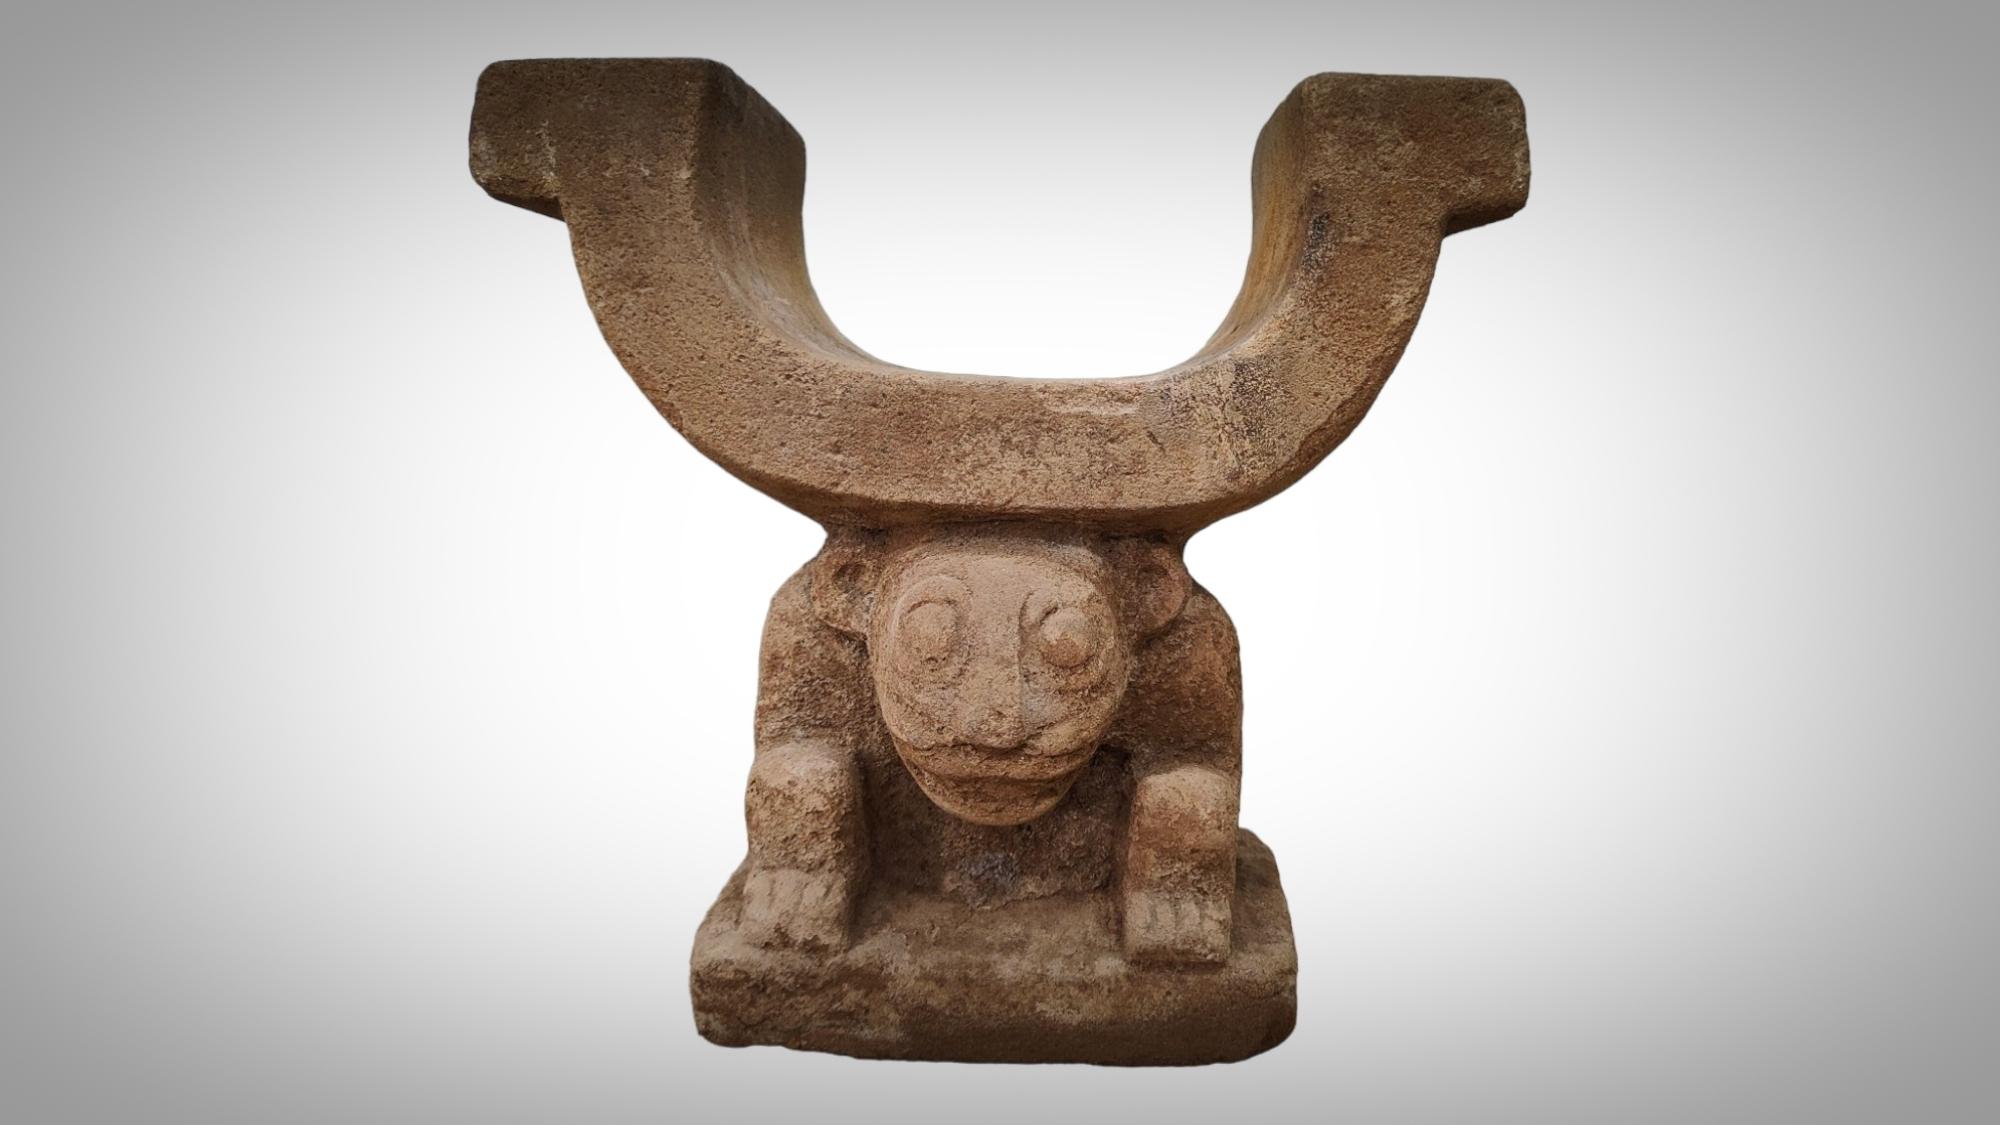 MANTEÑA CHAIR OF POWER CACHIQUE OF PREHISPANIC ECUADOR
The chair has been carved from a block of
detrital sedimentary rock, in which fossil remains can be seen. It is a calcarenite or
dark brownish-yellow, porous, coarse-grained calcareous